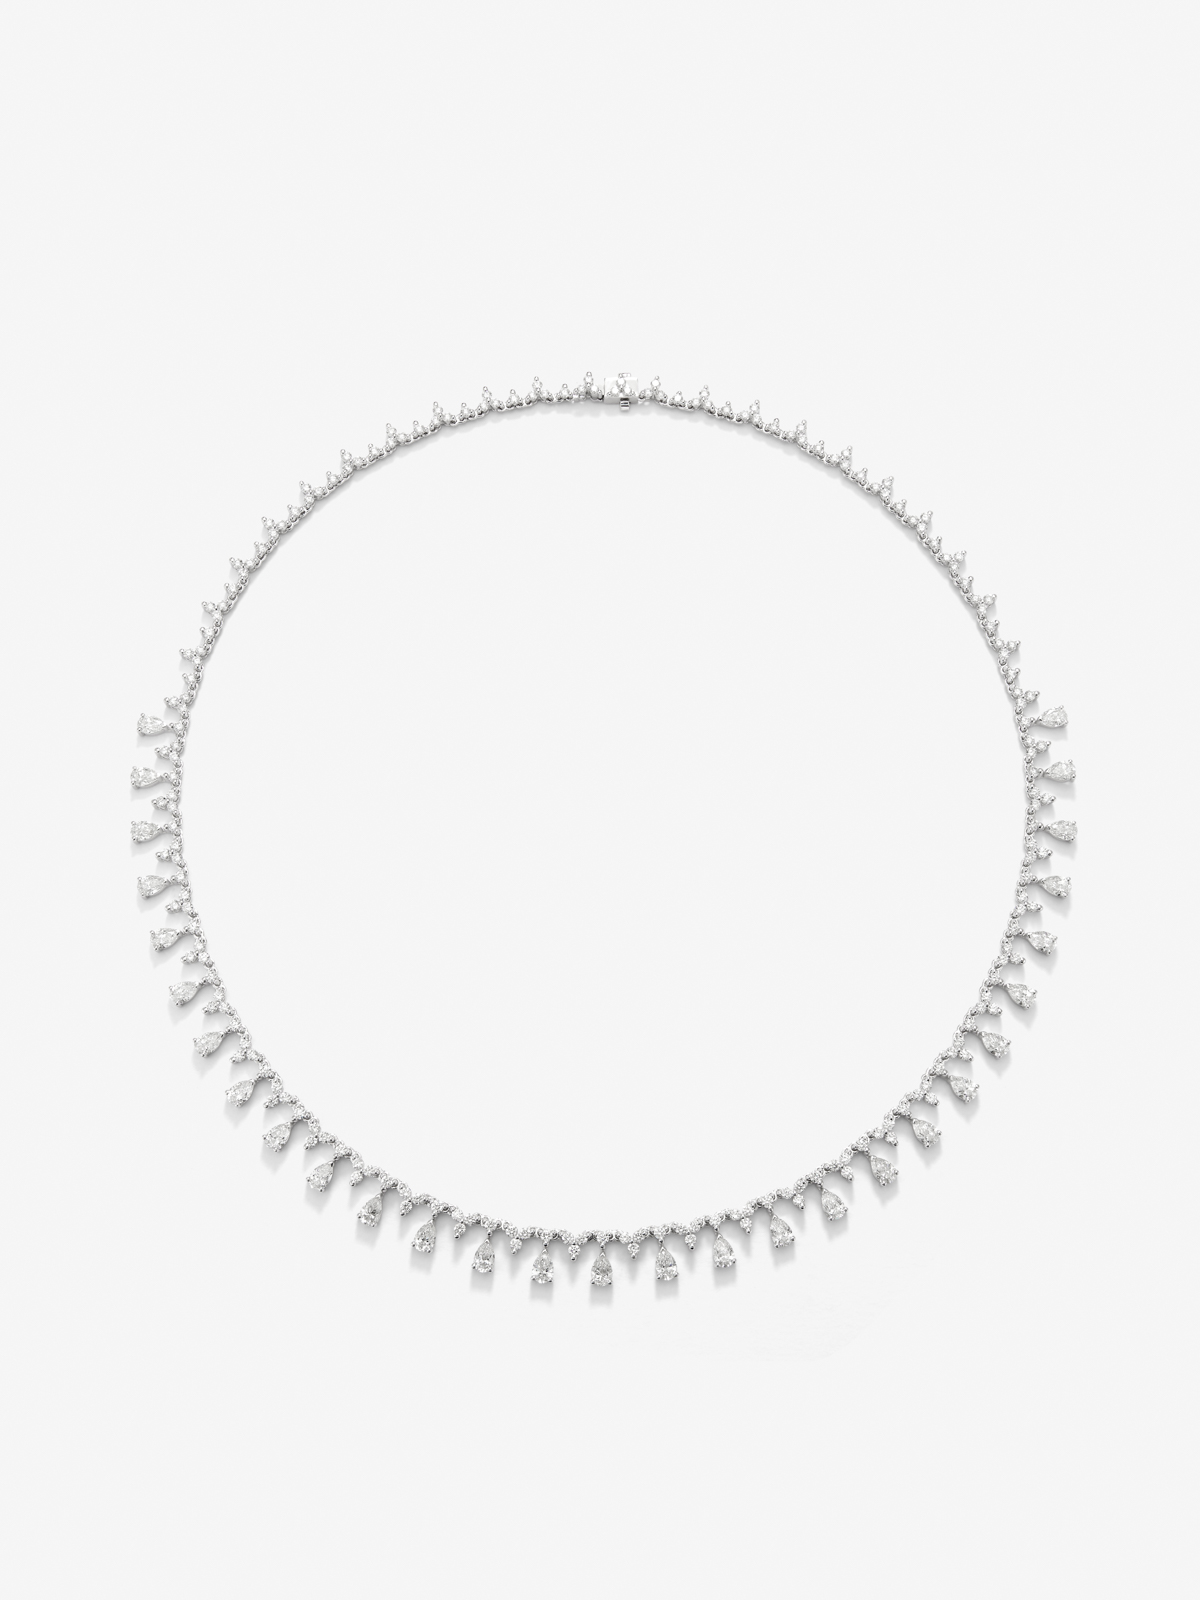 18K White Gold Rivière Collar with white and bright white diamonds of 6.06 cts